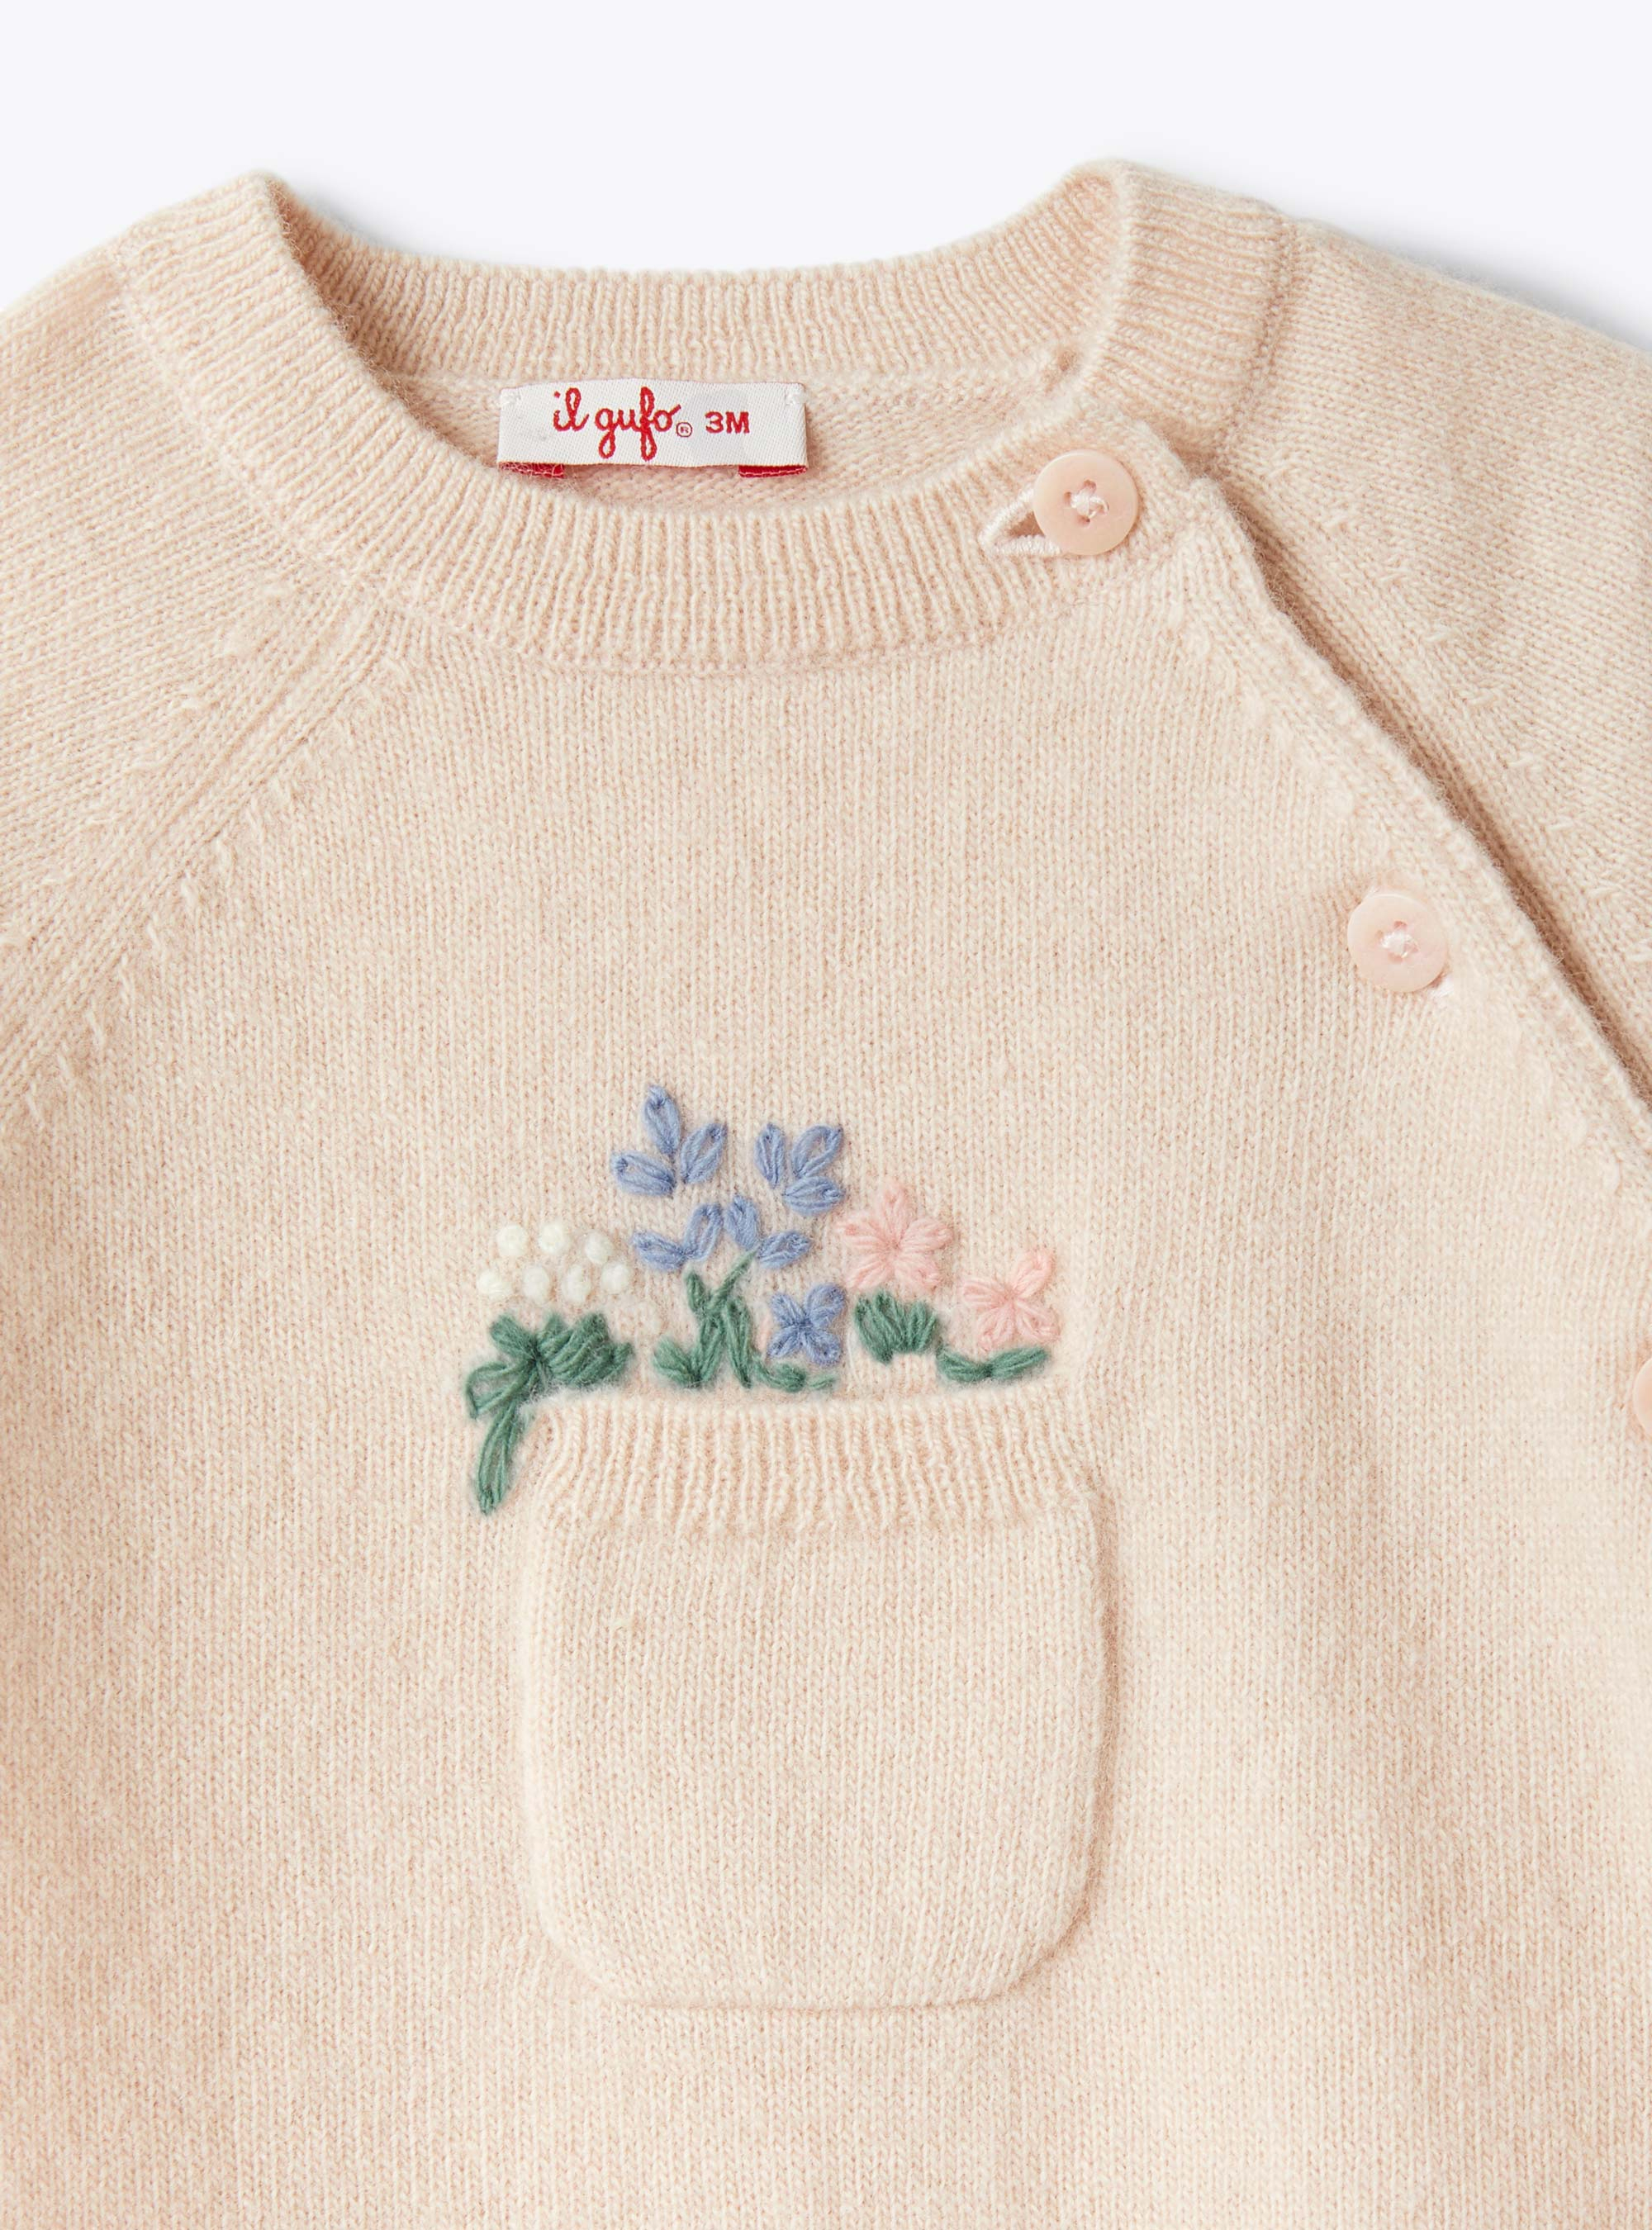 Tricot-knit babysuit with embroidered flowers - Pink | Il Gufo